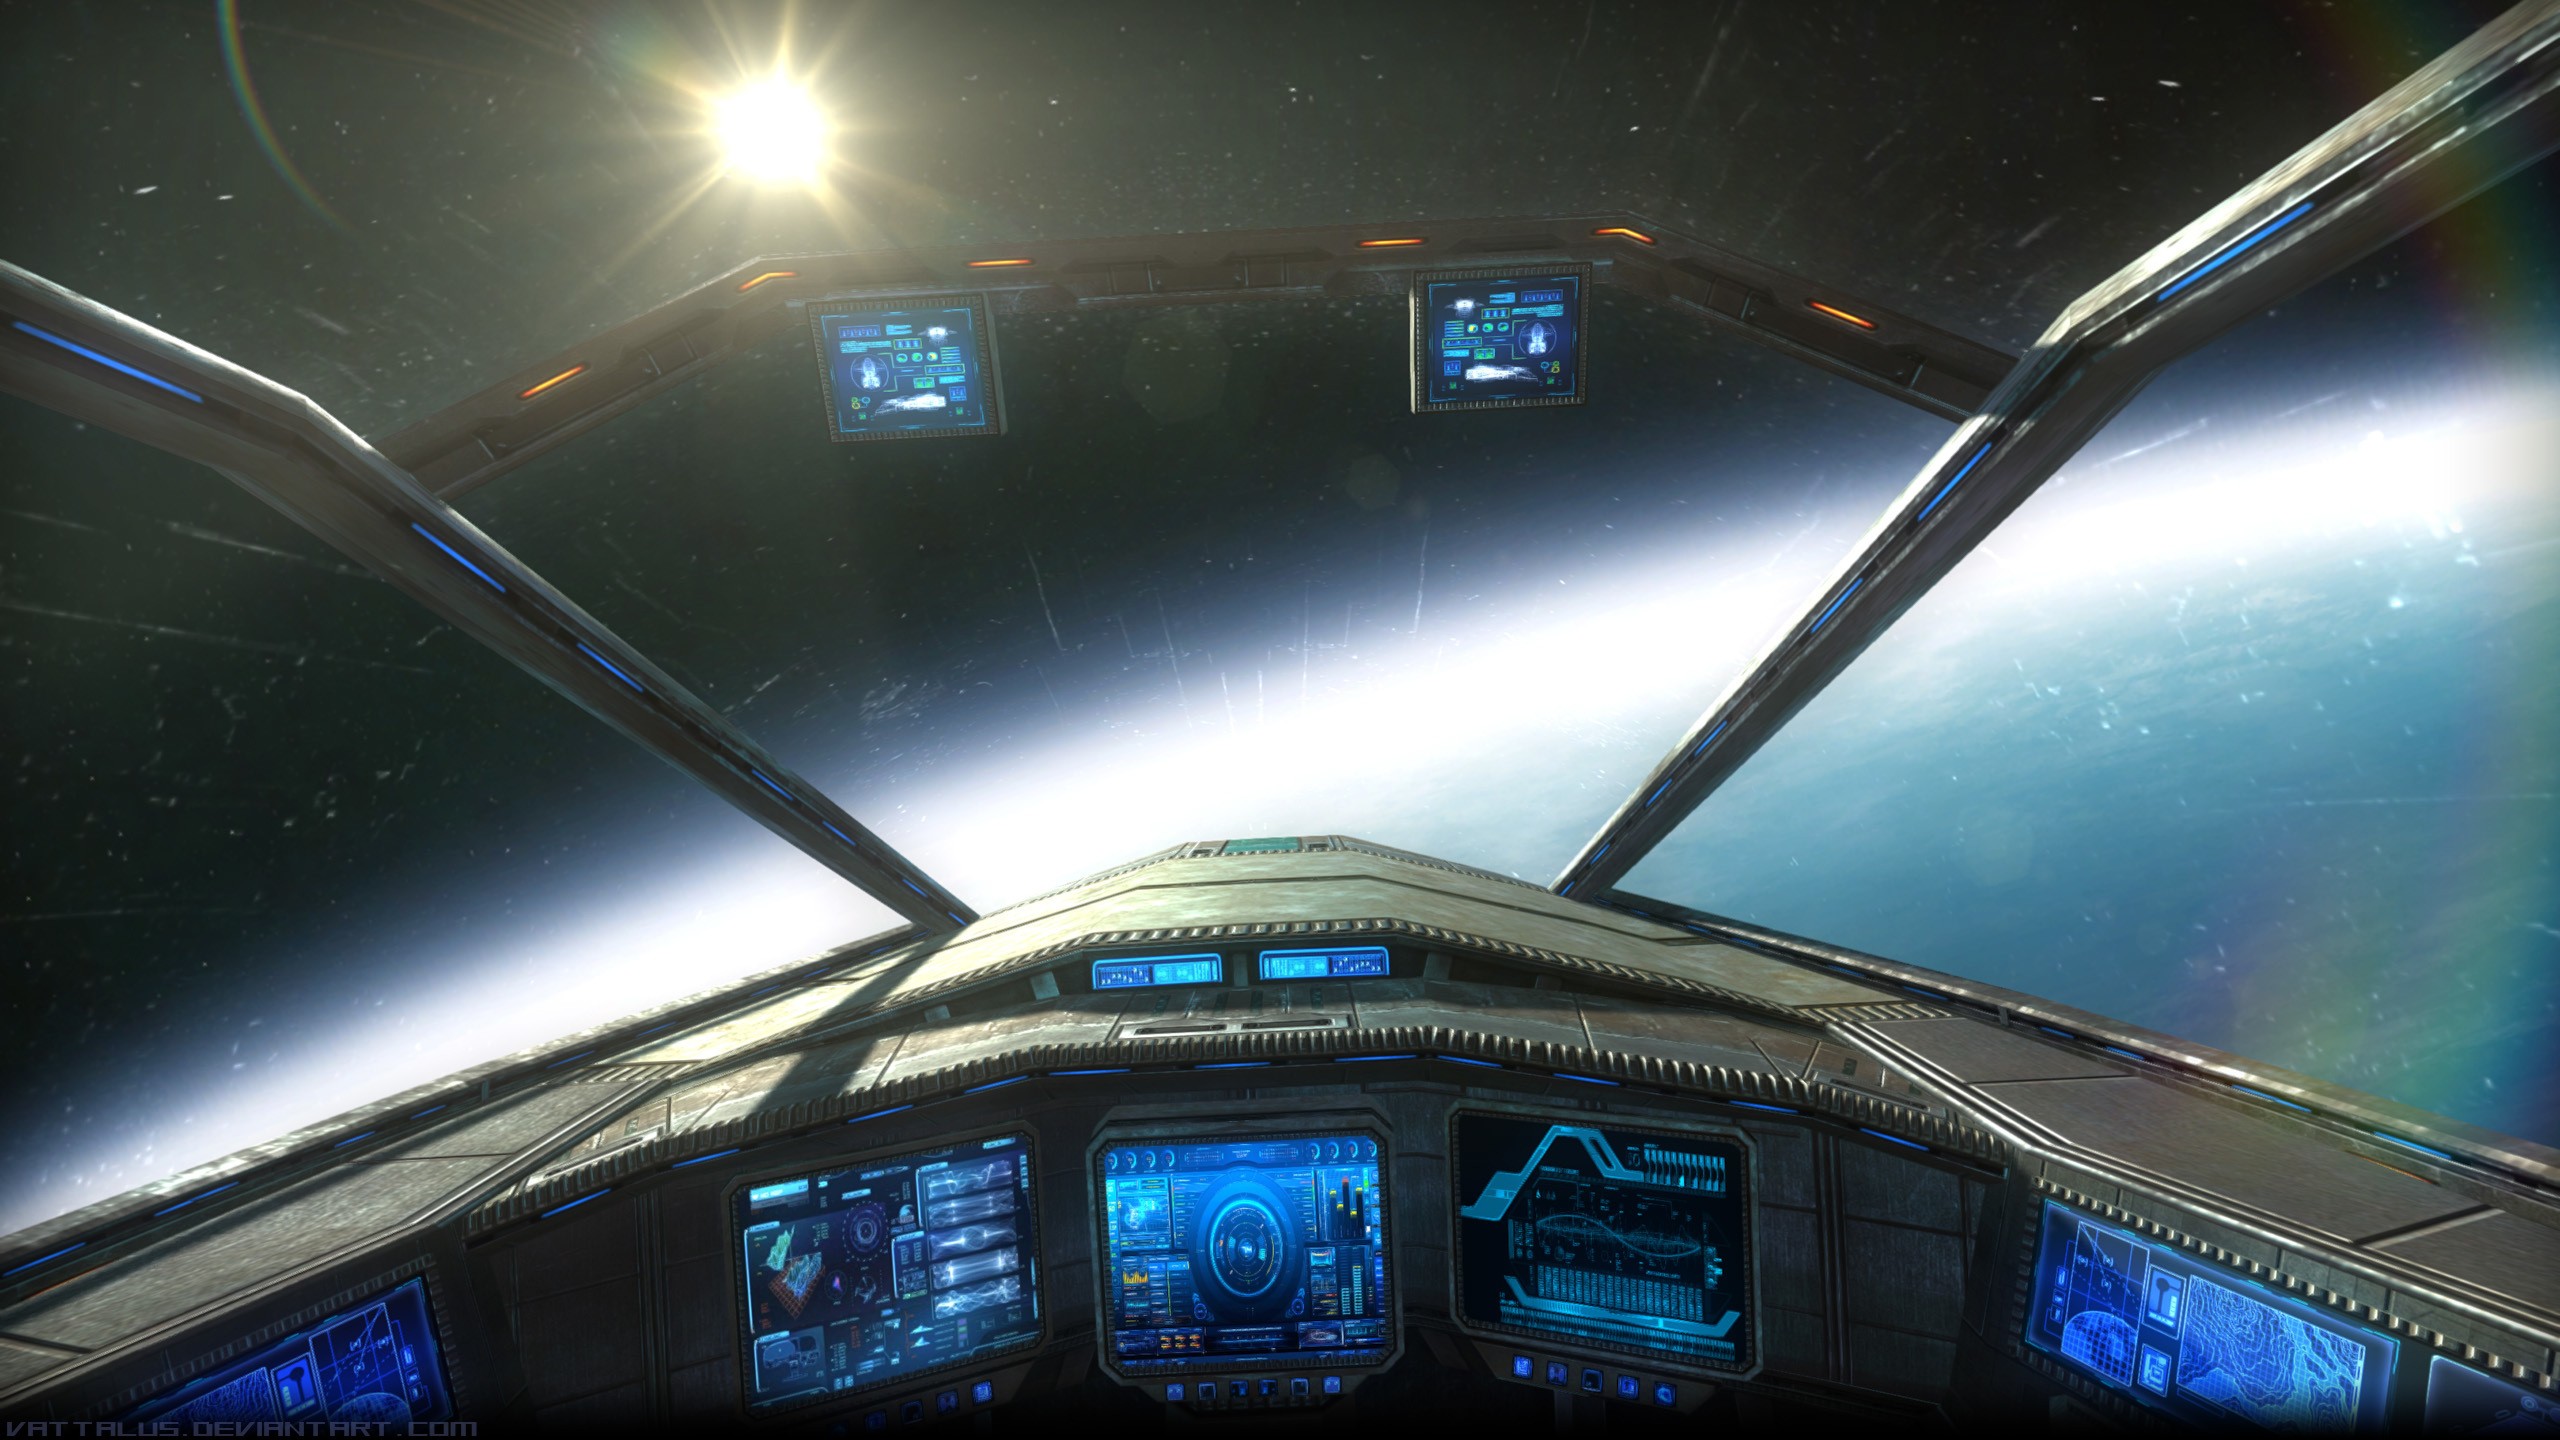 General 2560x1440 digital art space spaceship cockpit Star Citizen science fiction PC gaming vehicle